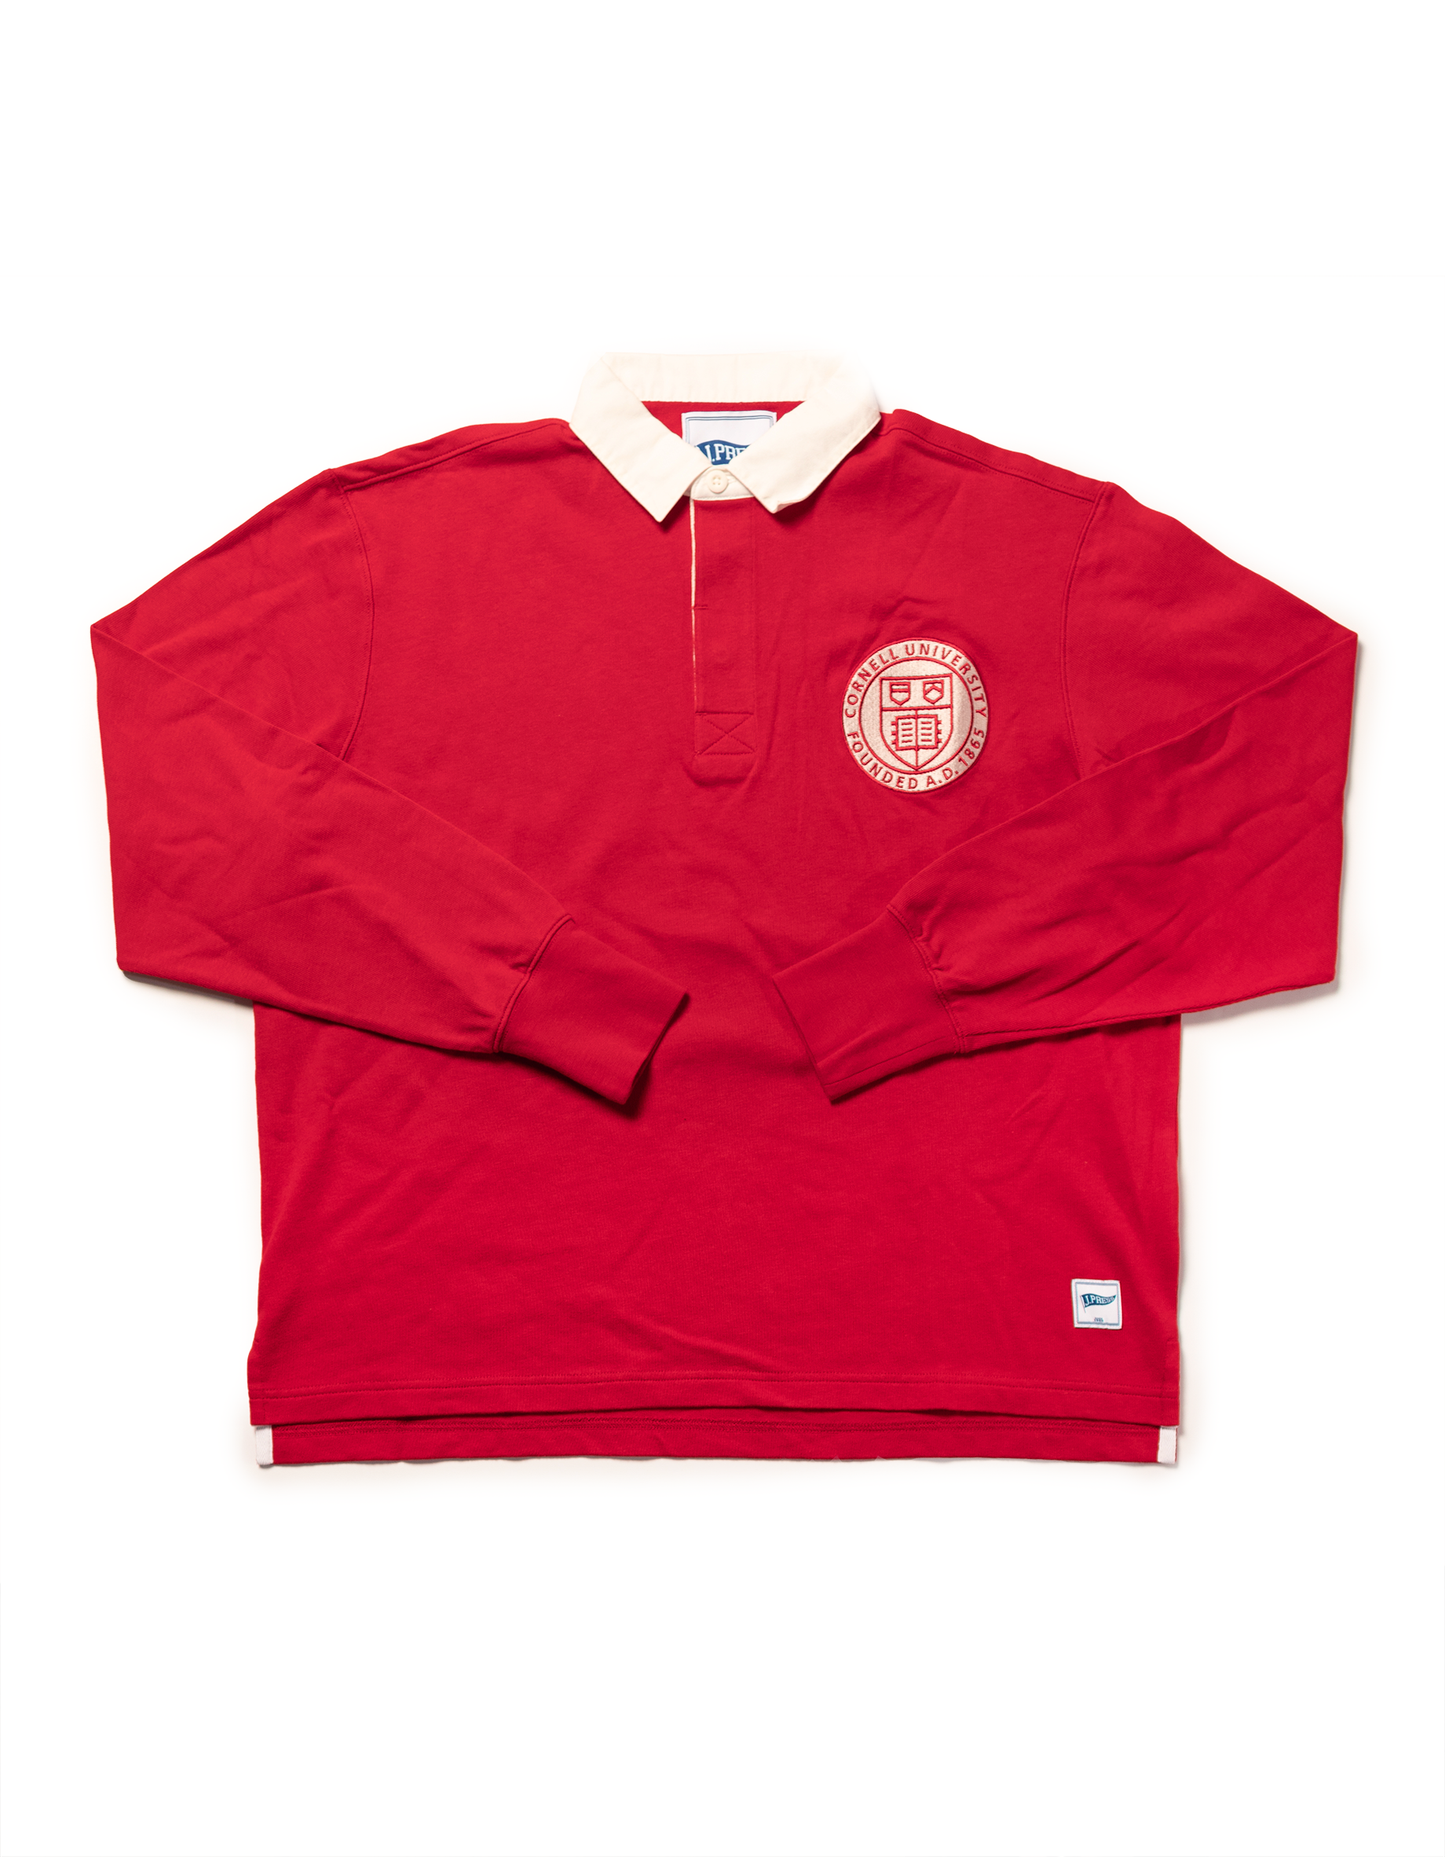 CORNELL RUGBY SHIRT - RED